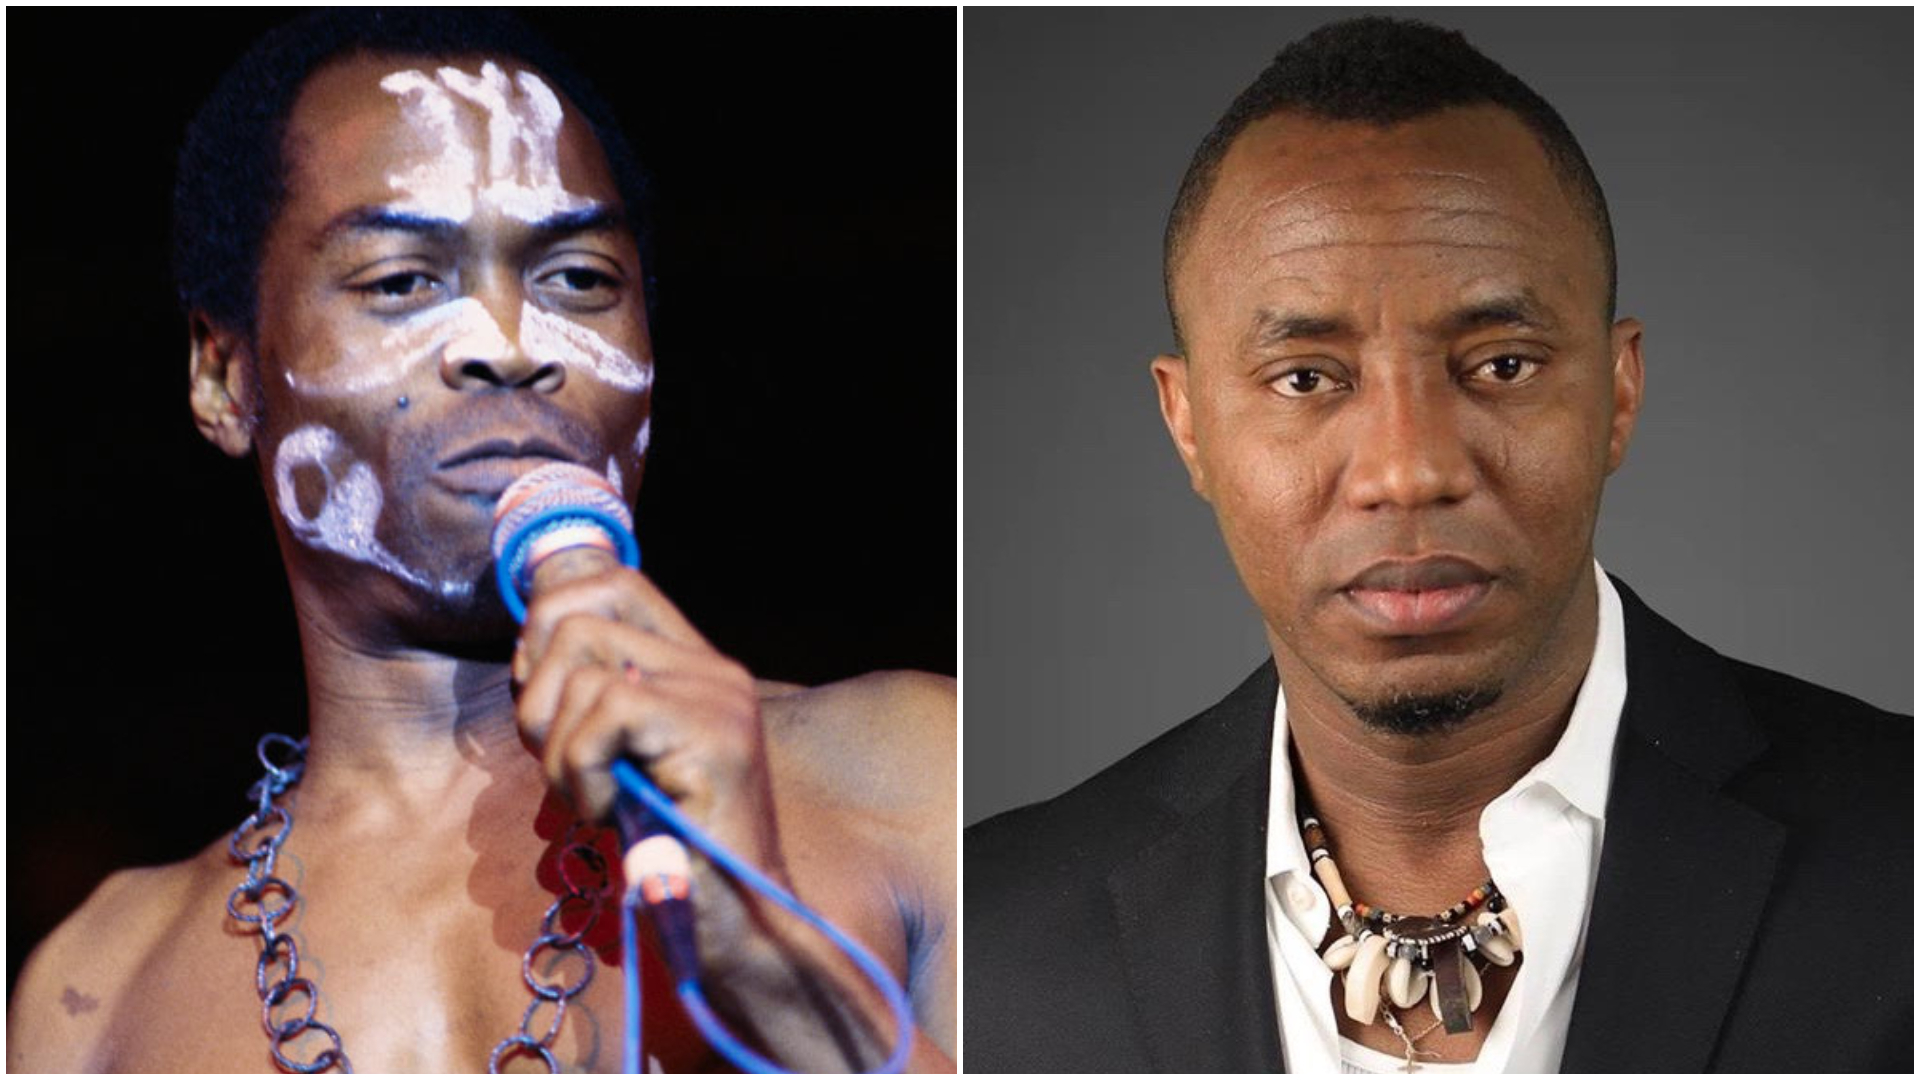 NDLEA injected Fela with poison – Dede Mabiaku reveals, says he fears for Sowore